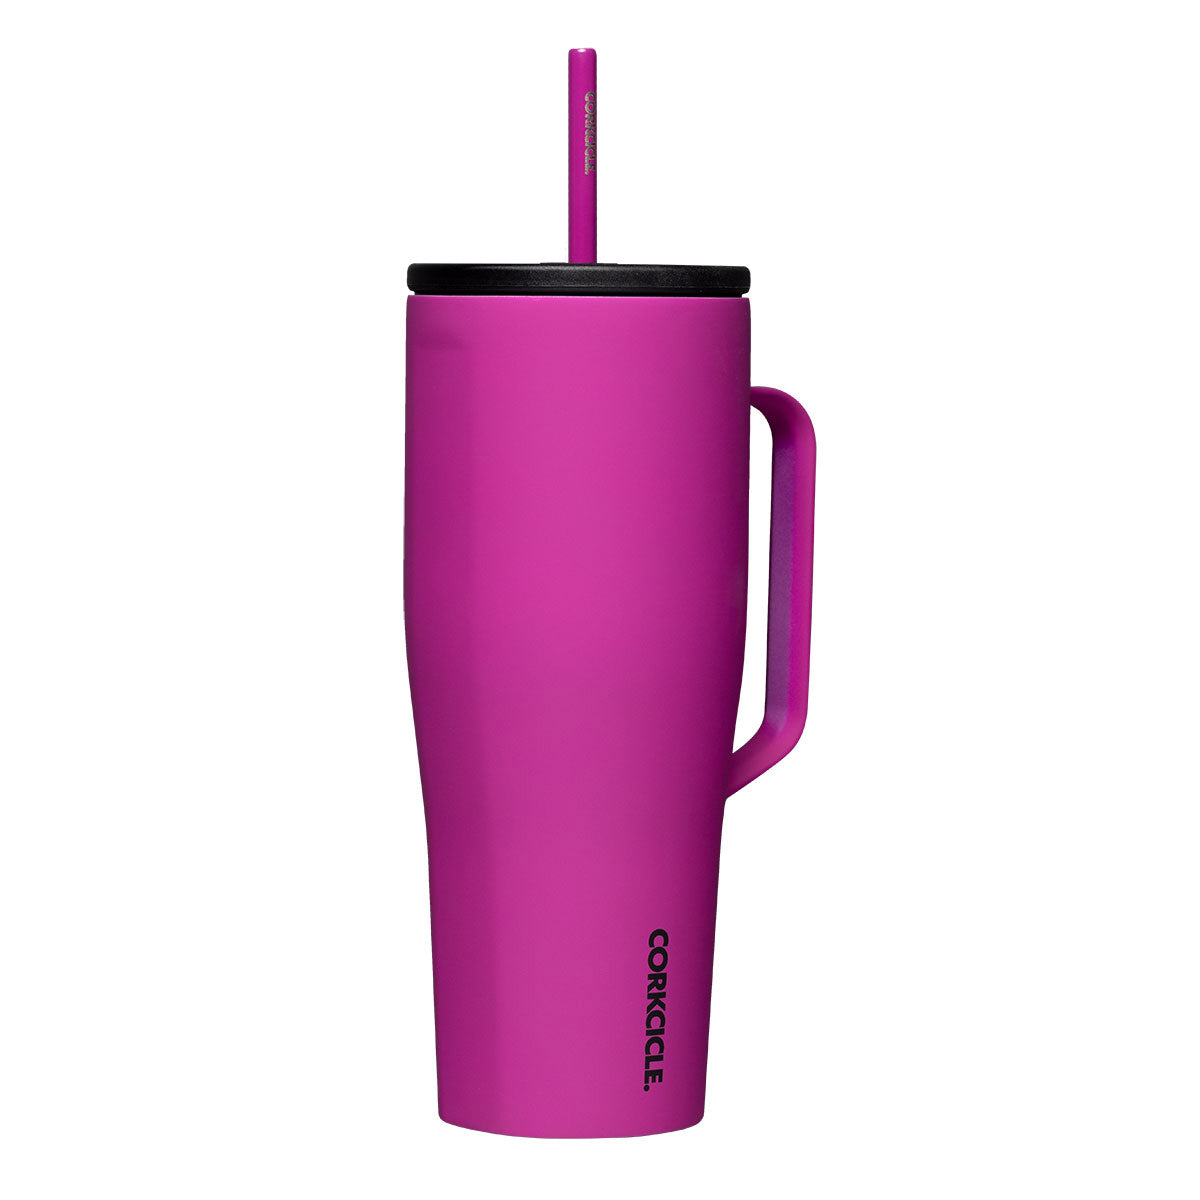 30oz Cold Cup XL Series A Berry Punch Premium